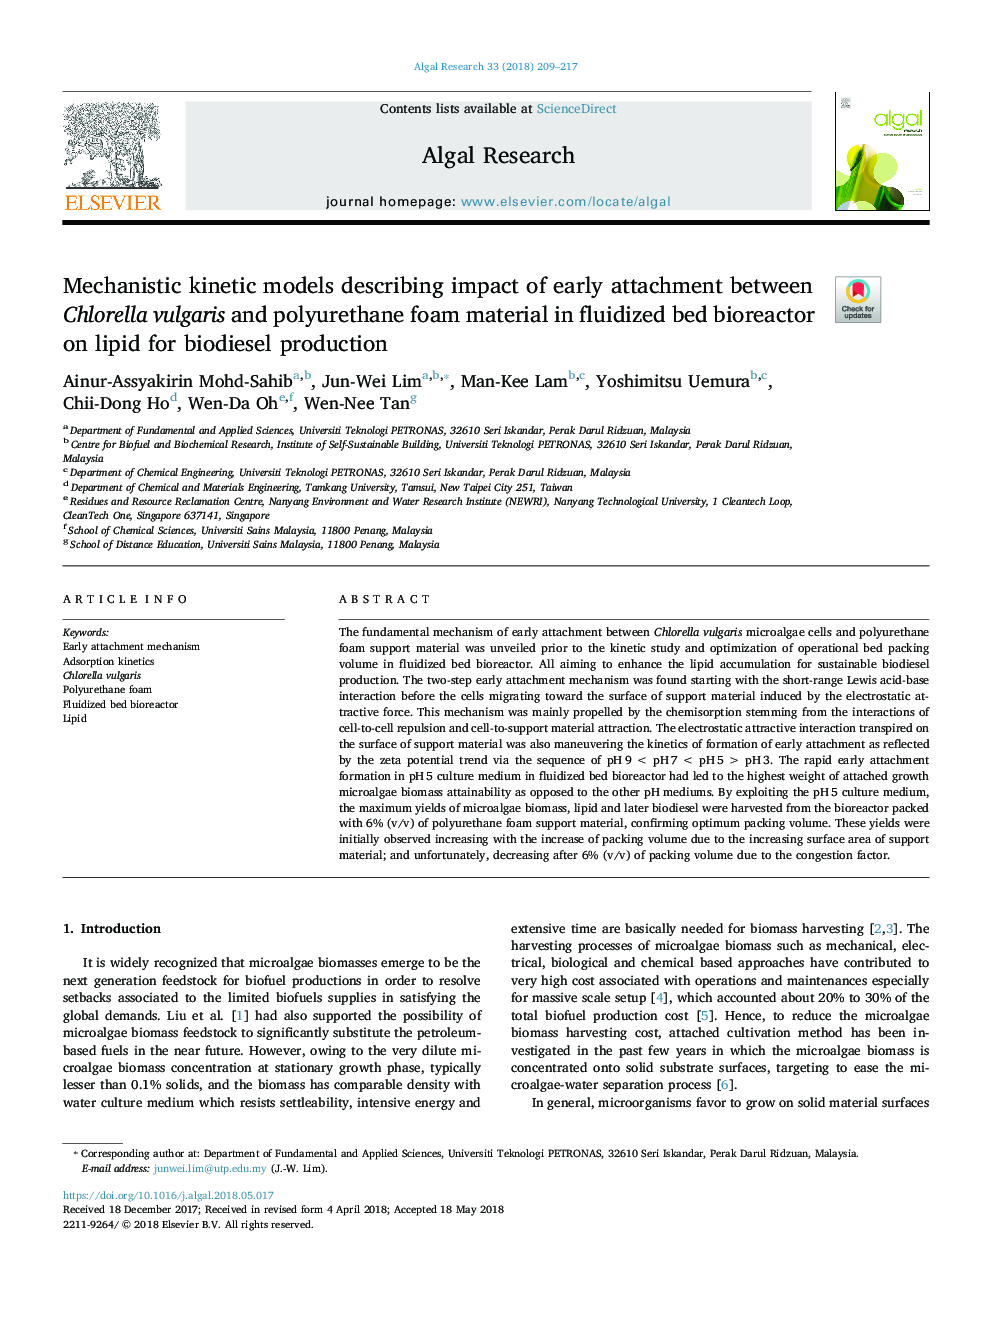 Mechanistic kinetic models describing impact of early attachment between Chlorella vulgaris and polyurethane foam material in fluidized bed bioreactor on lipid for biodiesel production